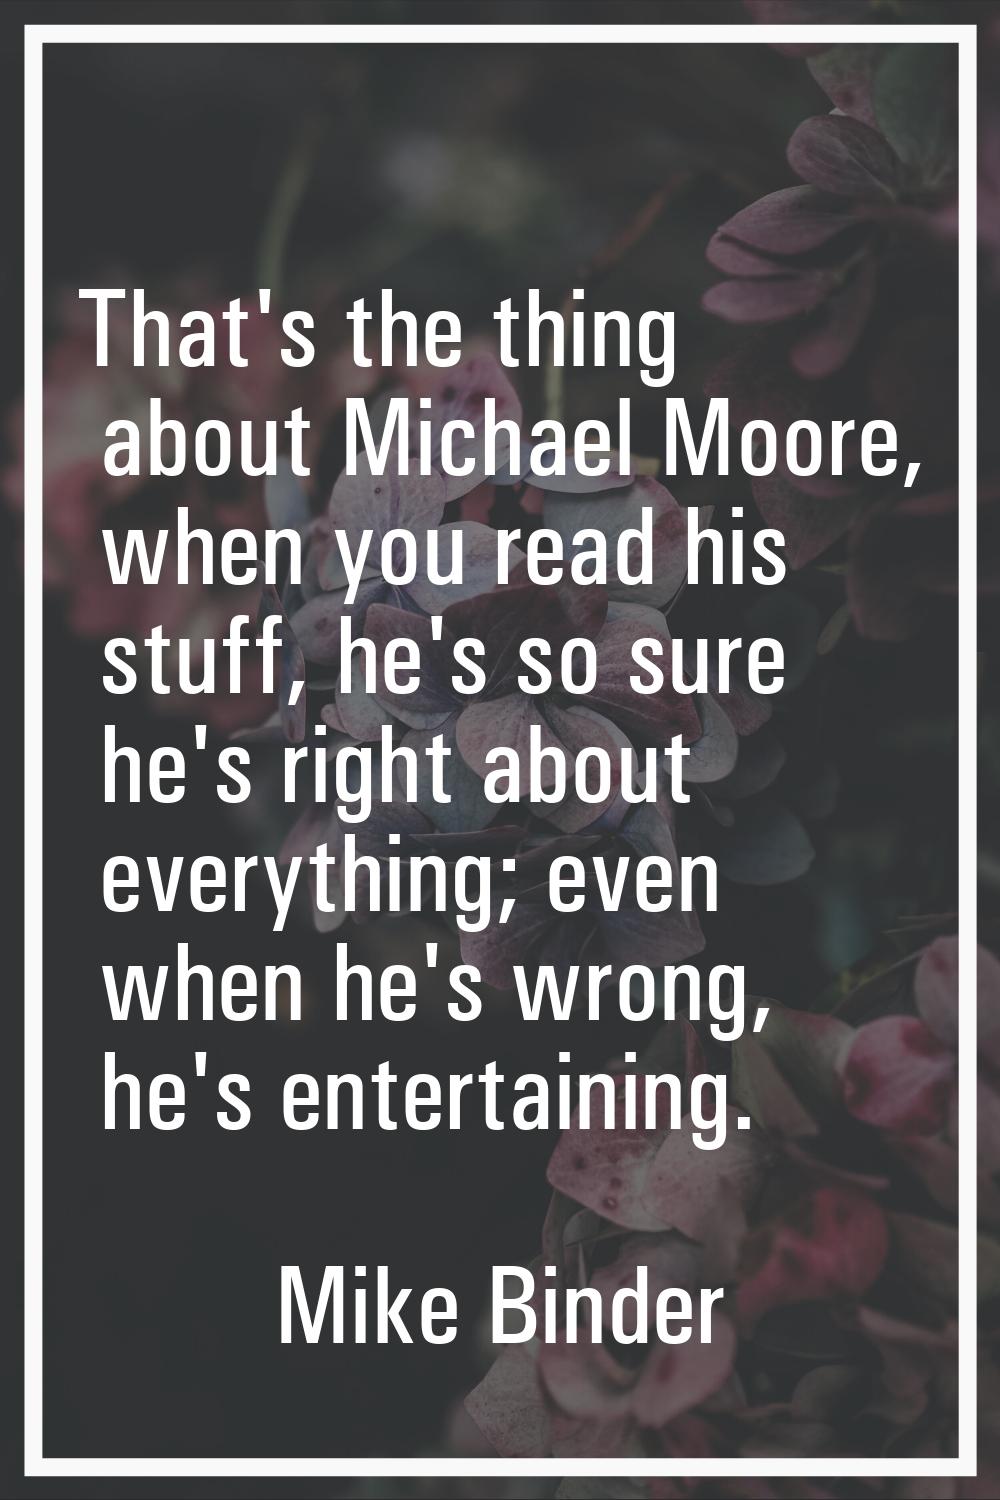 That's the thing about Michael Moore, when you read his stuff, he's so sure he's right about everyt